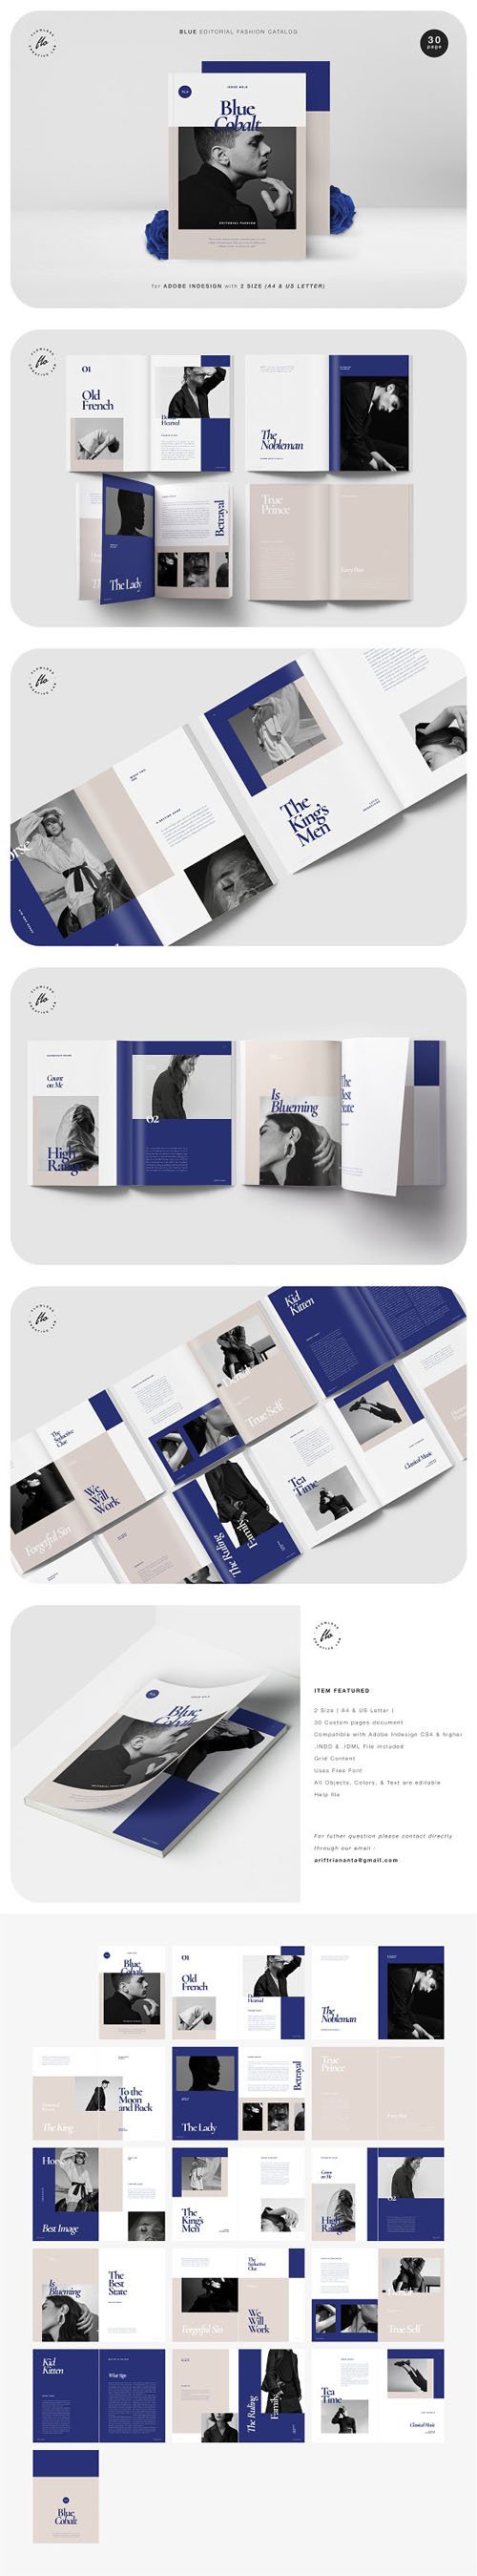 Blue Editorial Fashion Catalog Indesign INDD Templates [A4/US Letter]